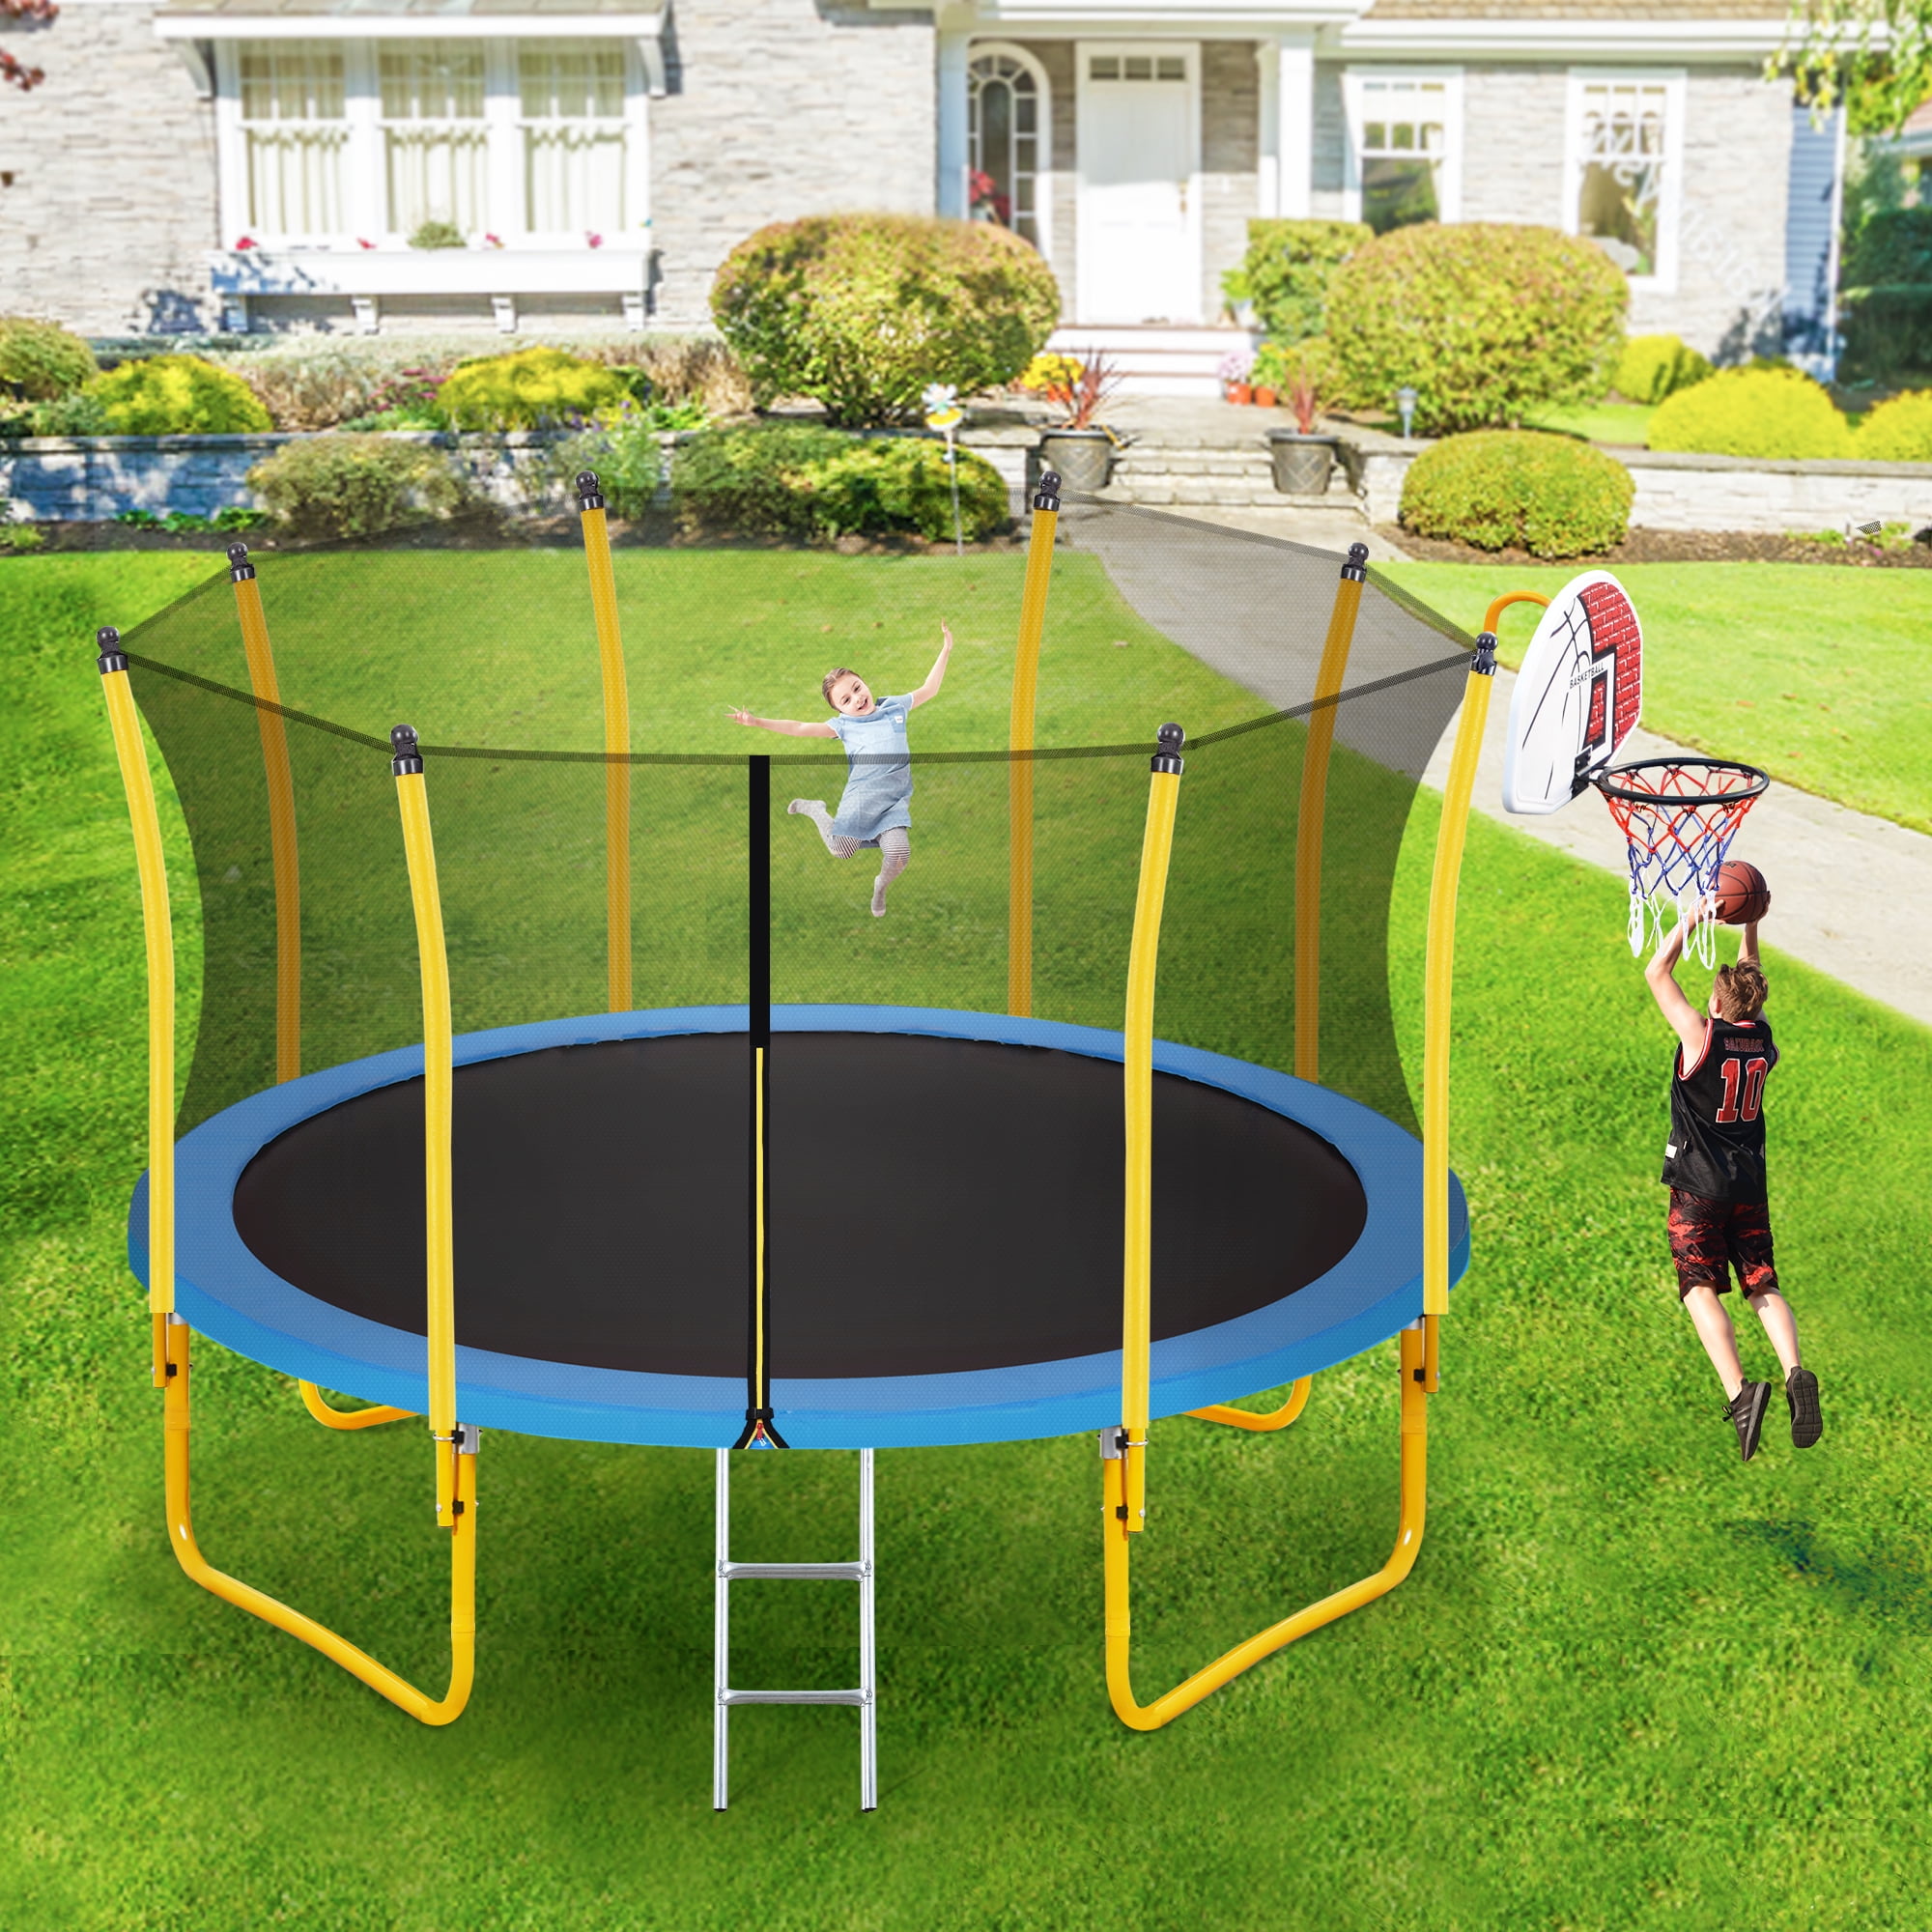 Details about   Kids 5FT Trampoline Play Exercise Jumping Bed Round W/Safety Enclosure Net Pad 